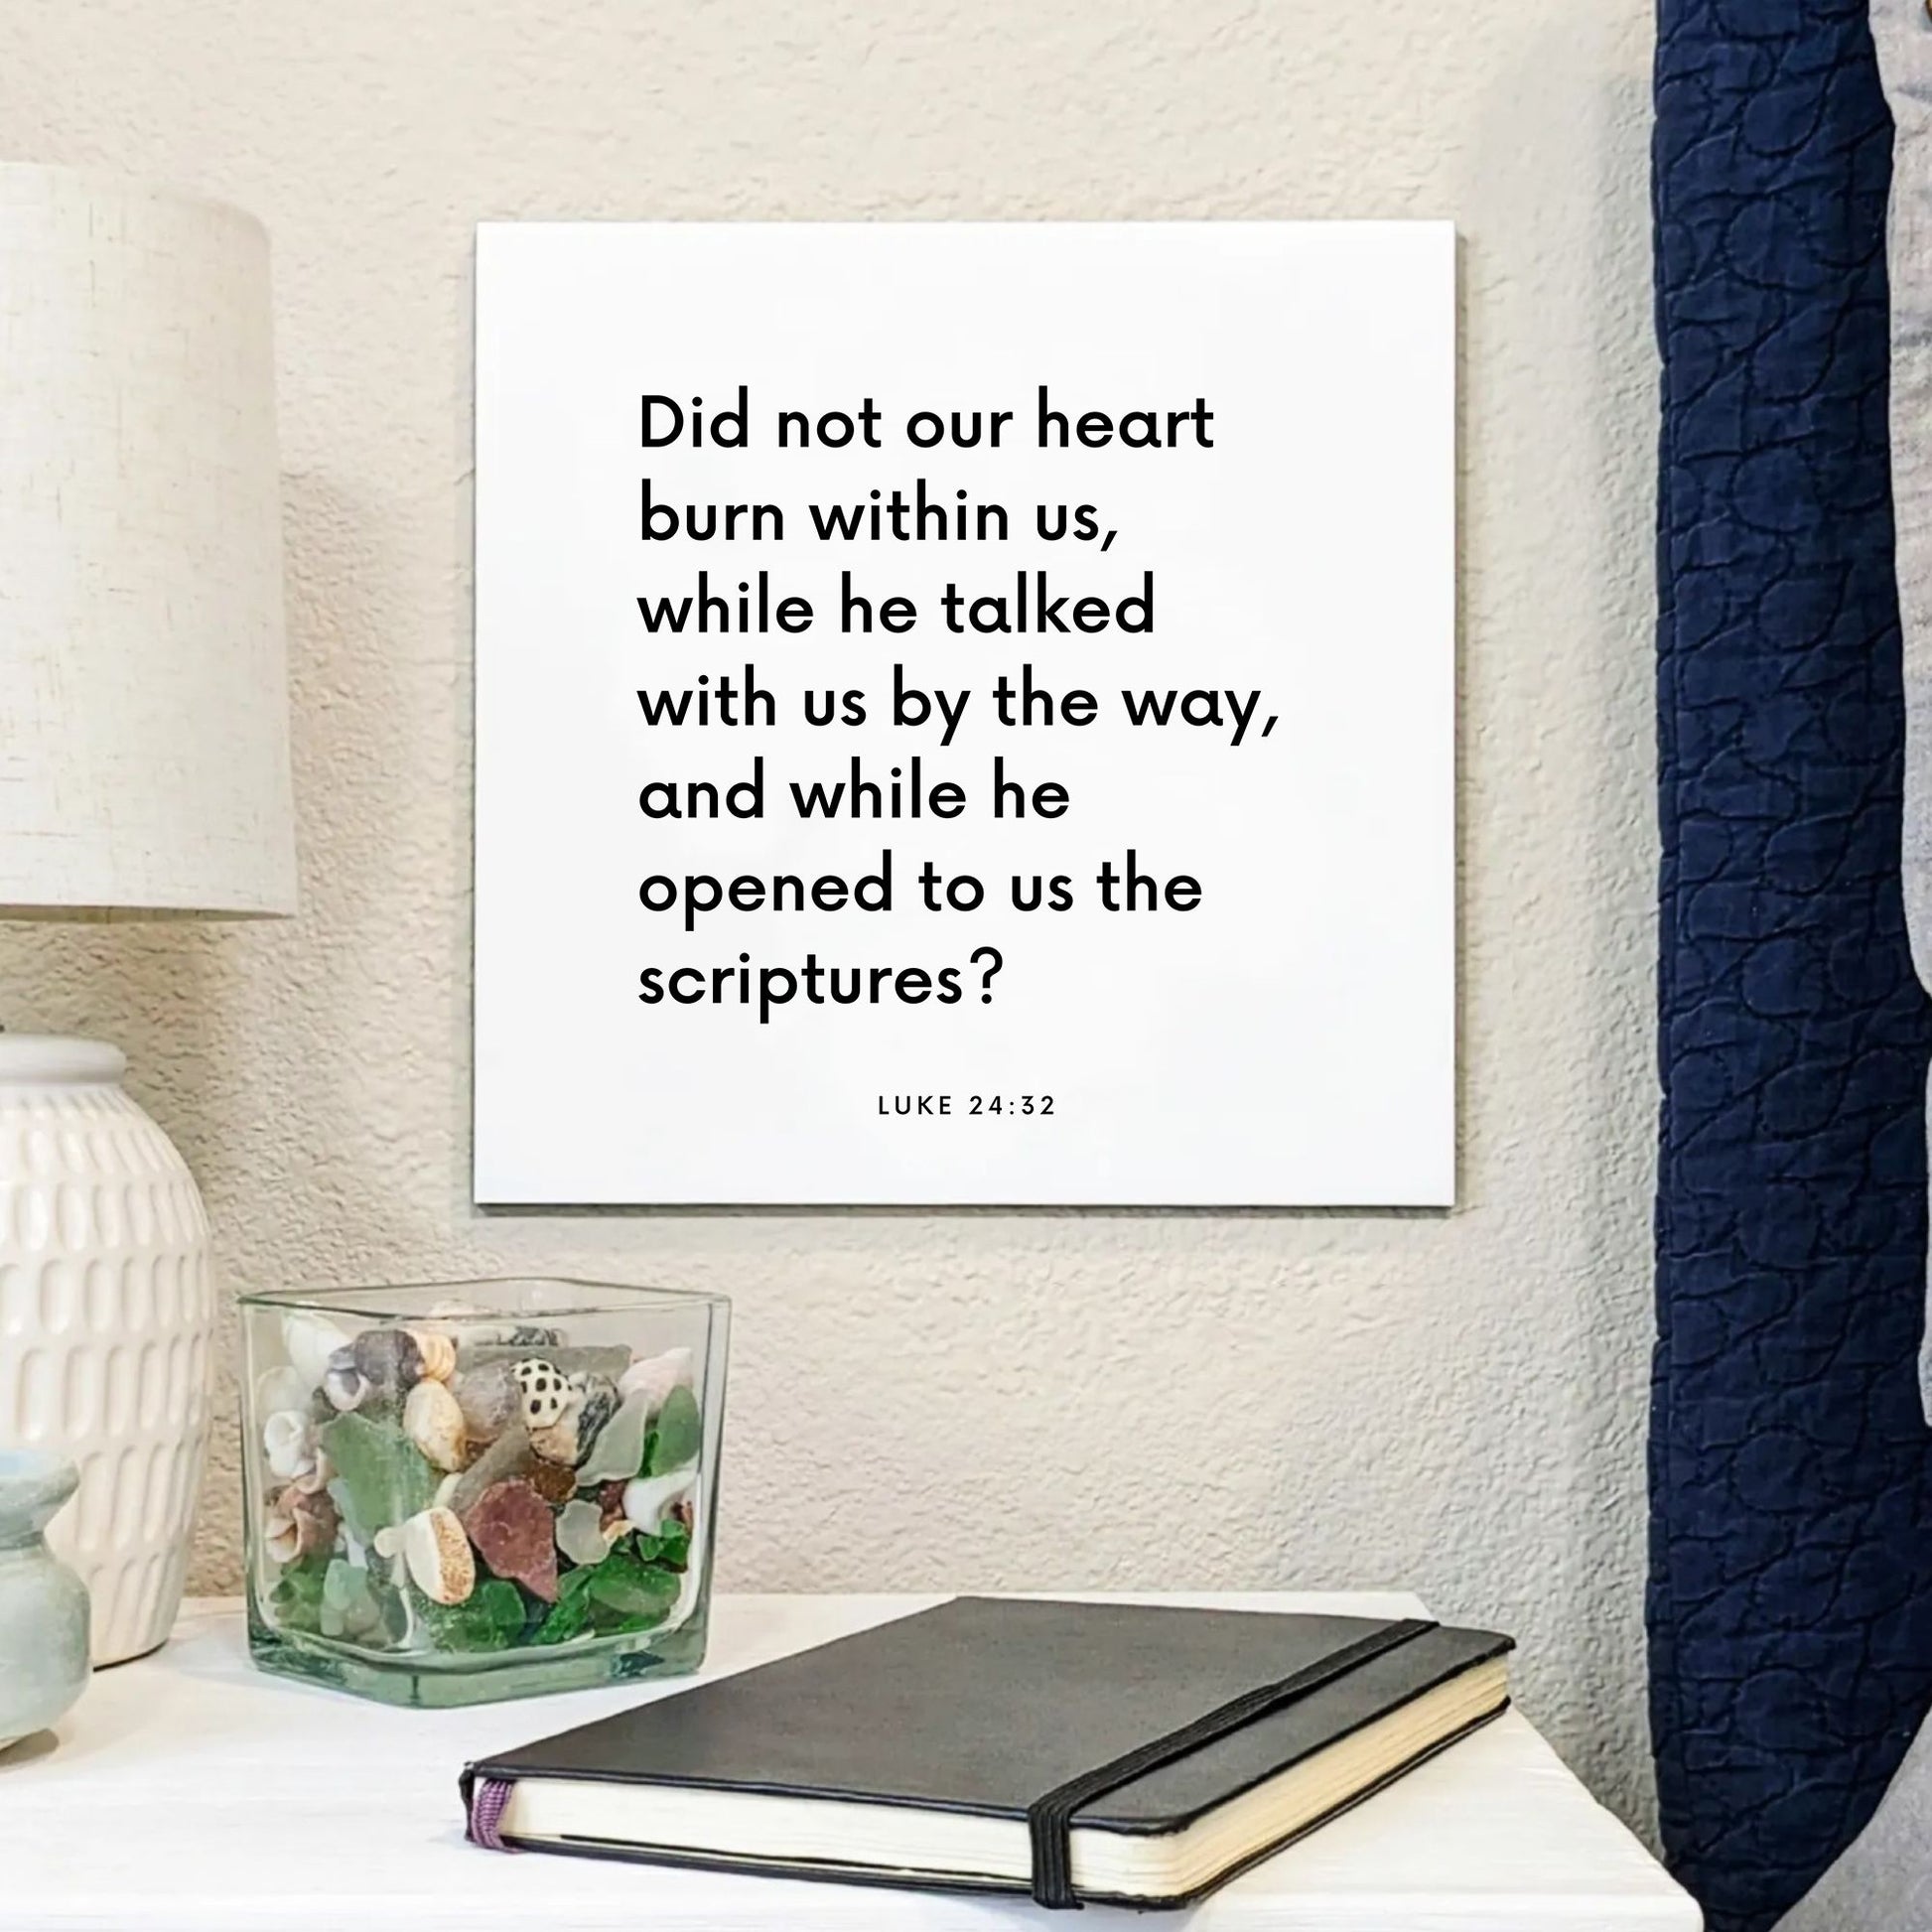 Bedside mouting of the scripture tile for Luke 24:32 - "Did not our heart burn within us?"